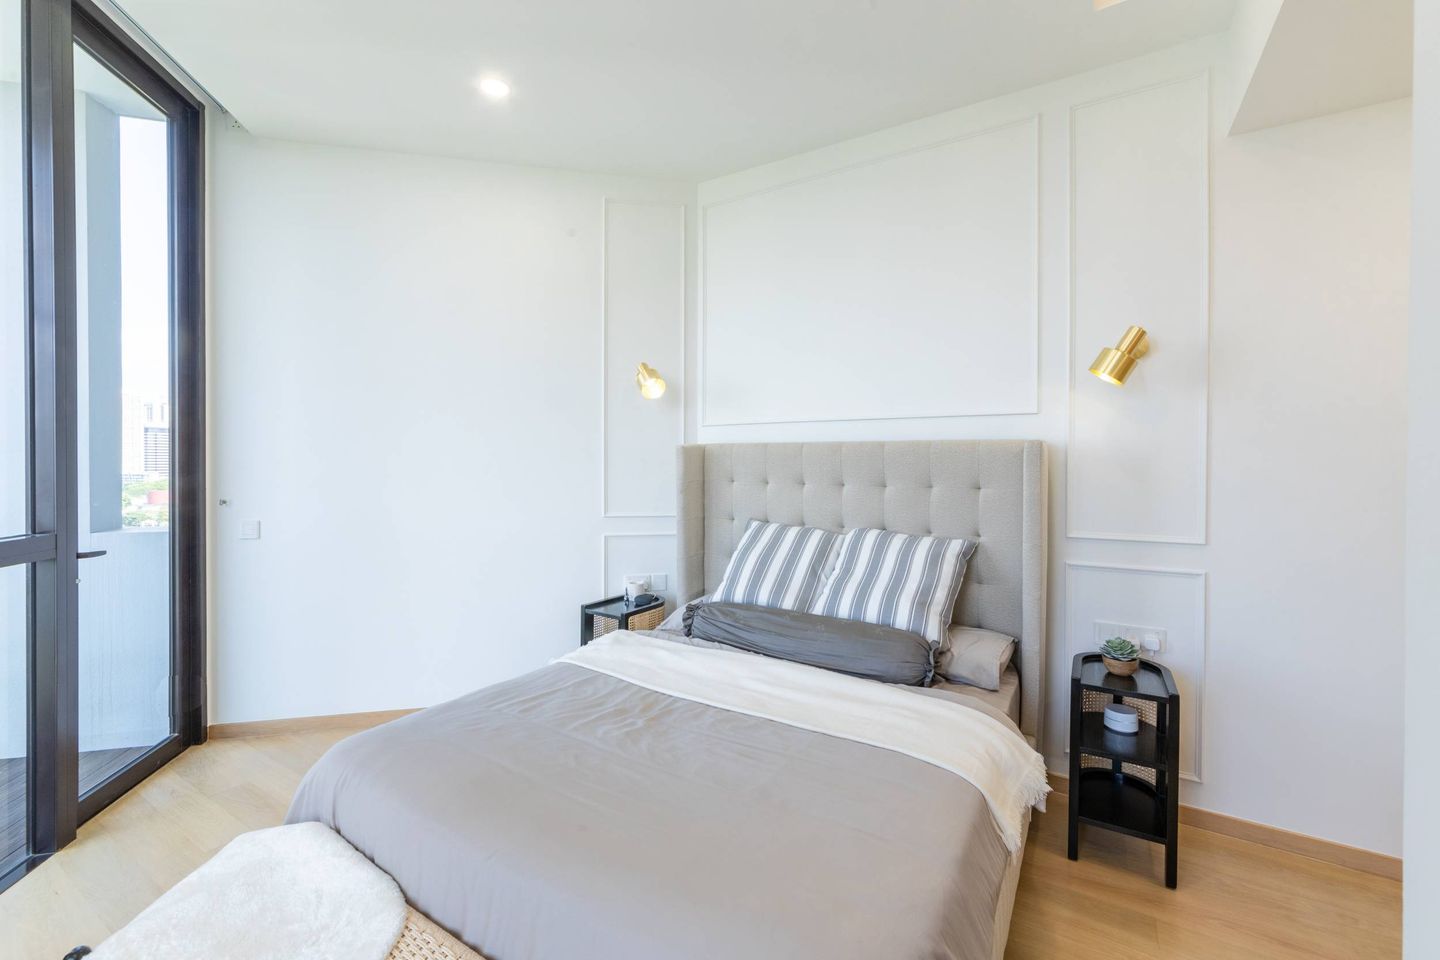 Transitional Master Bedroom With Queen Size Bed